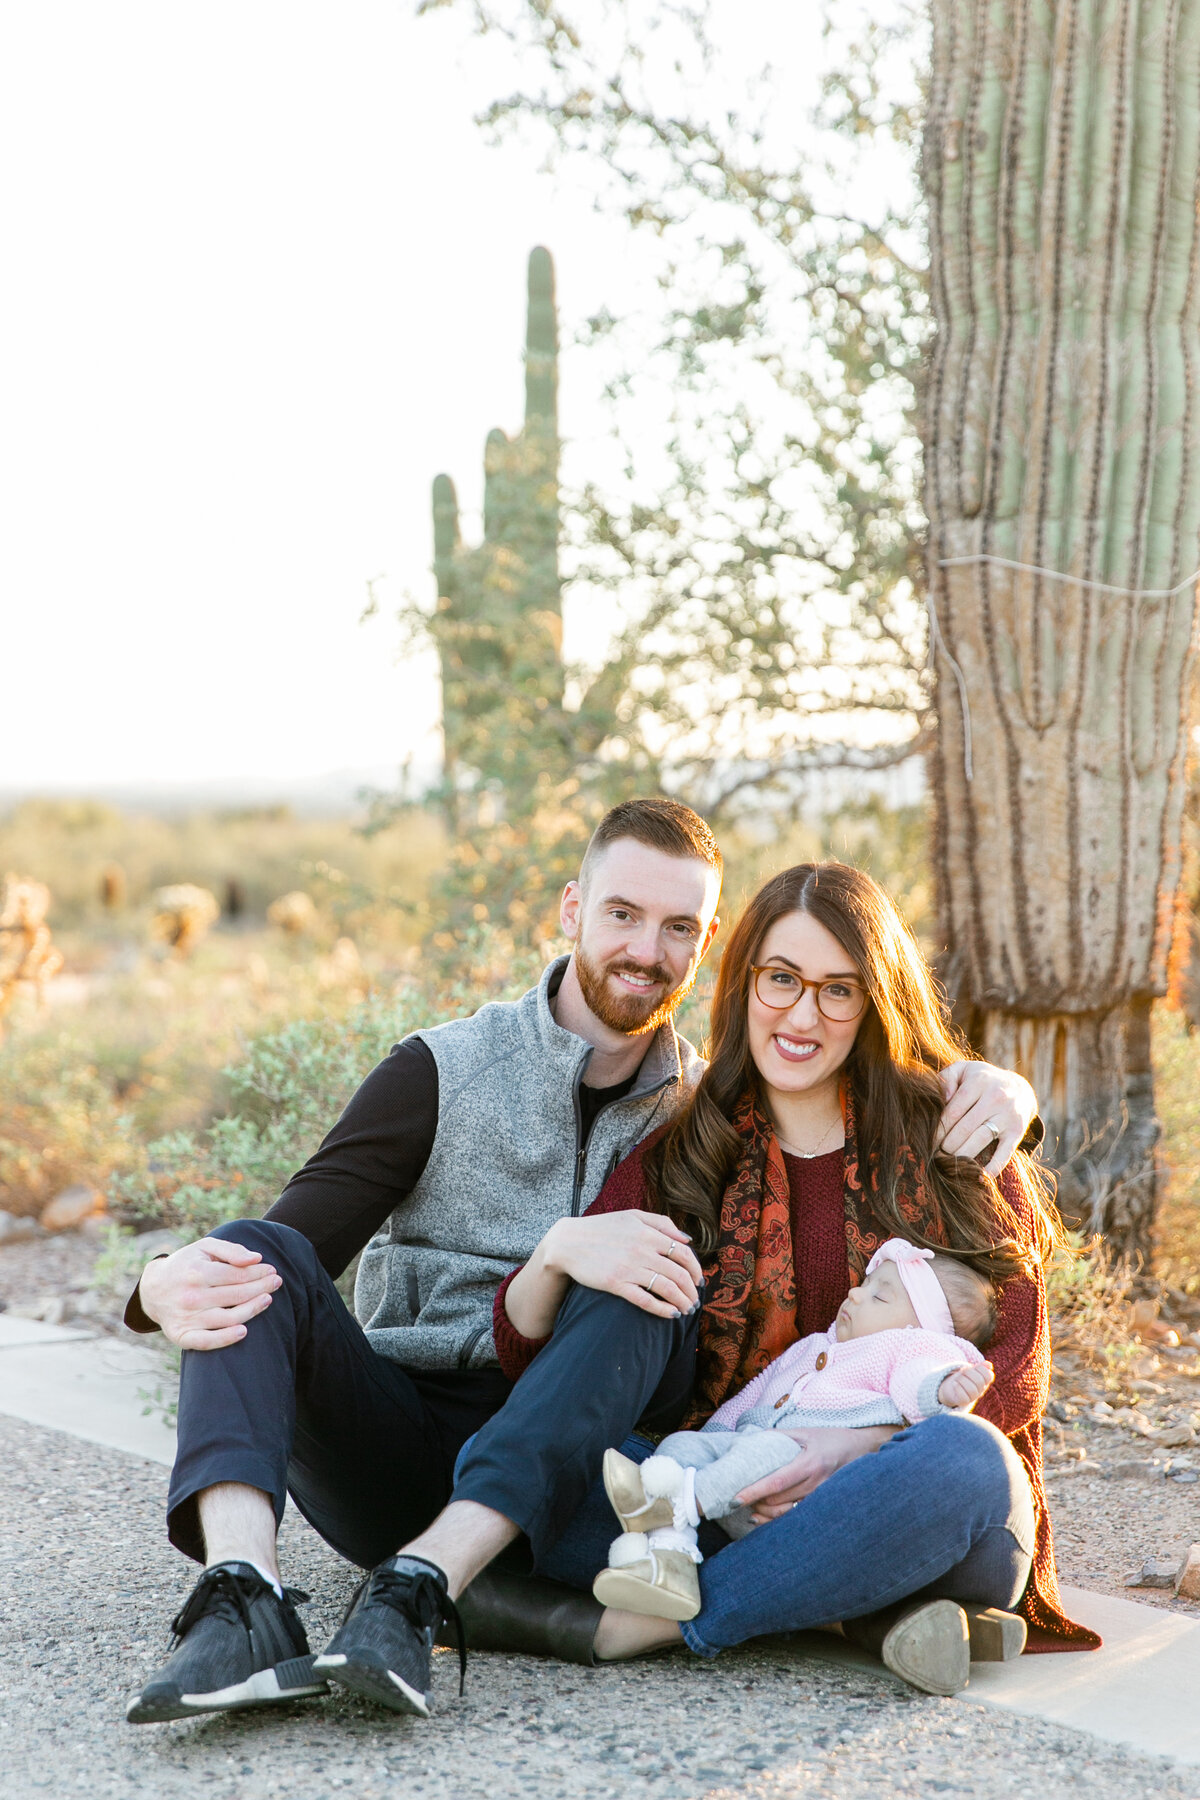 Karlie Colleen Photography - Scottsdale Family Photography - Lauren & Family-119